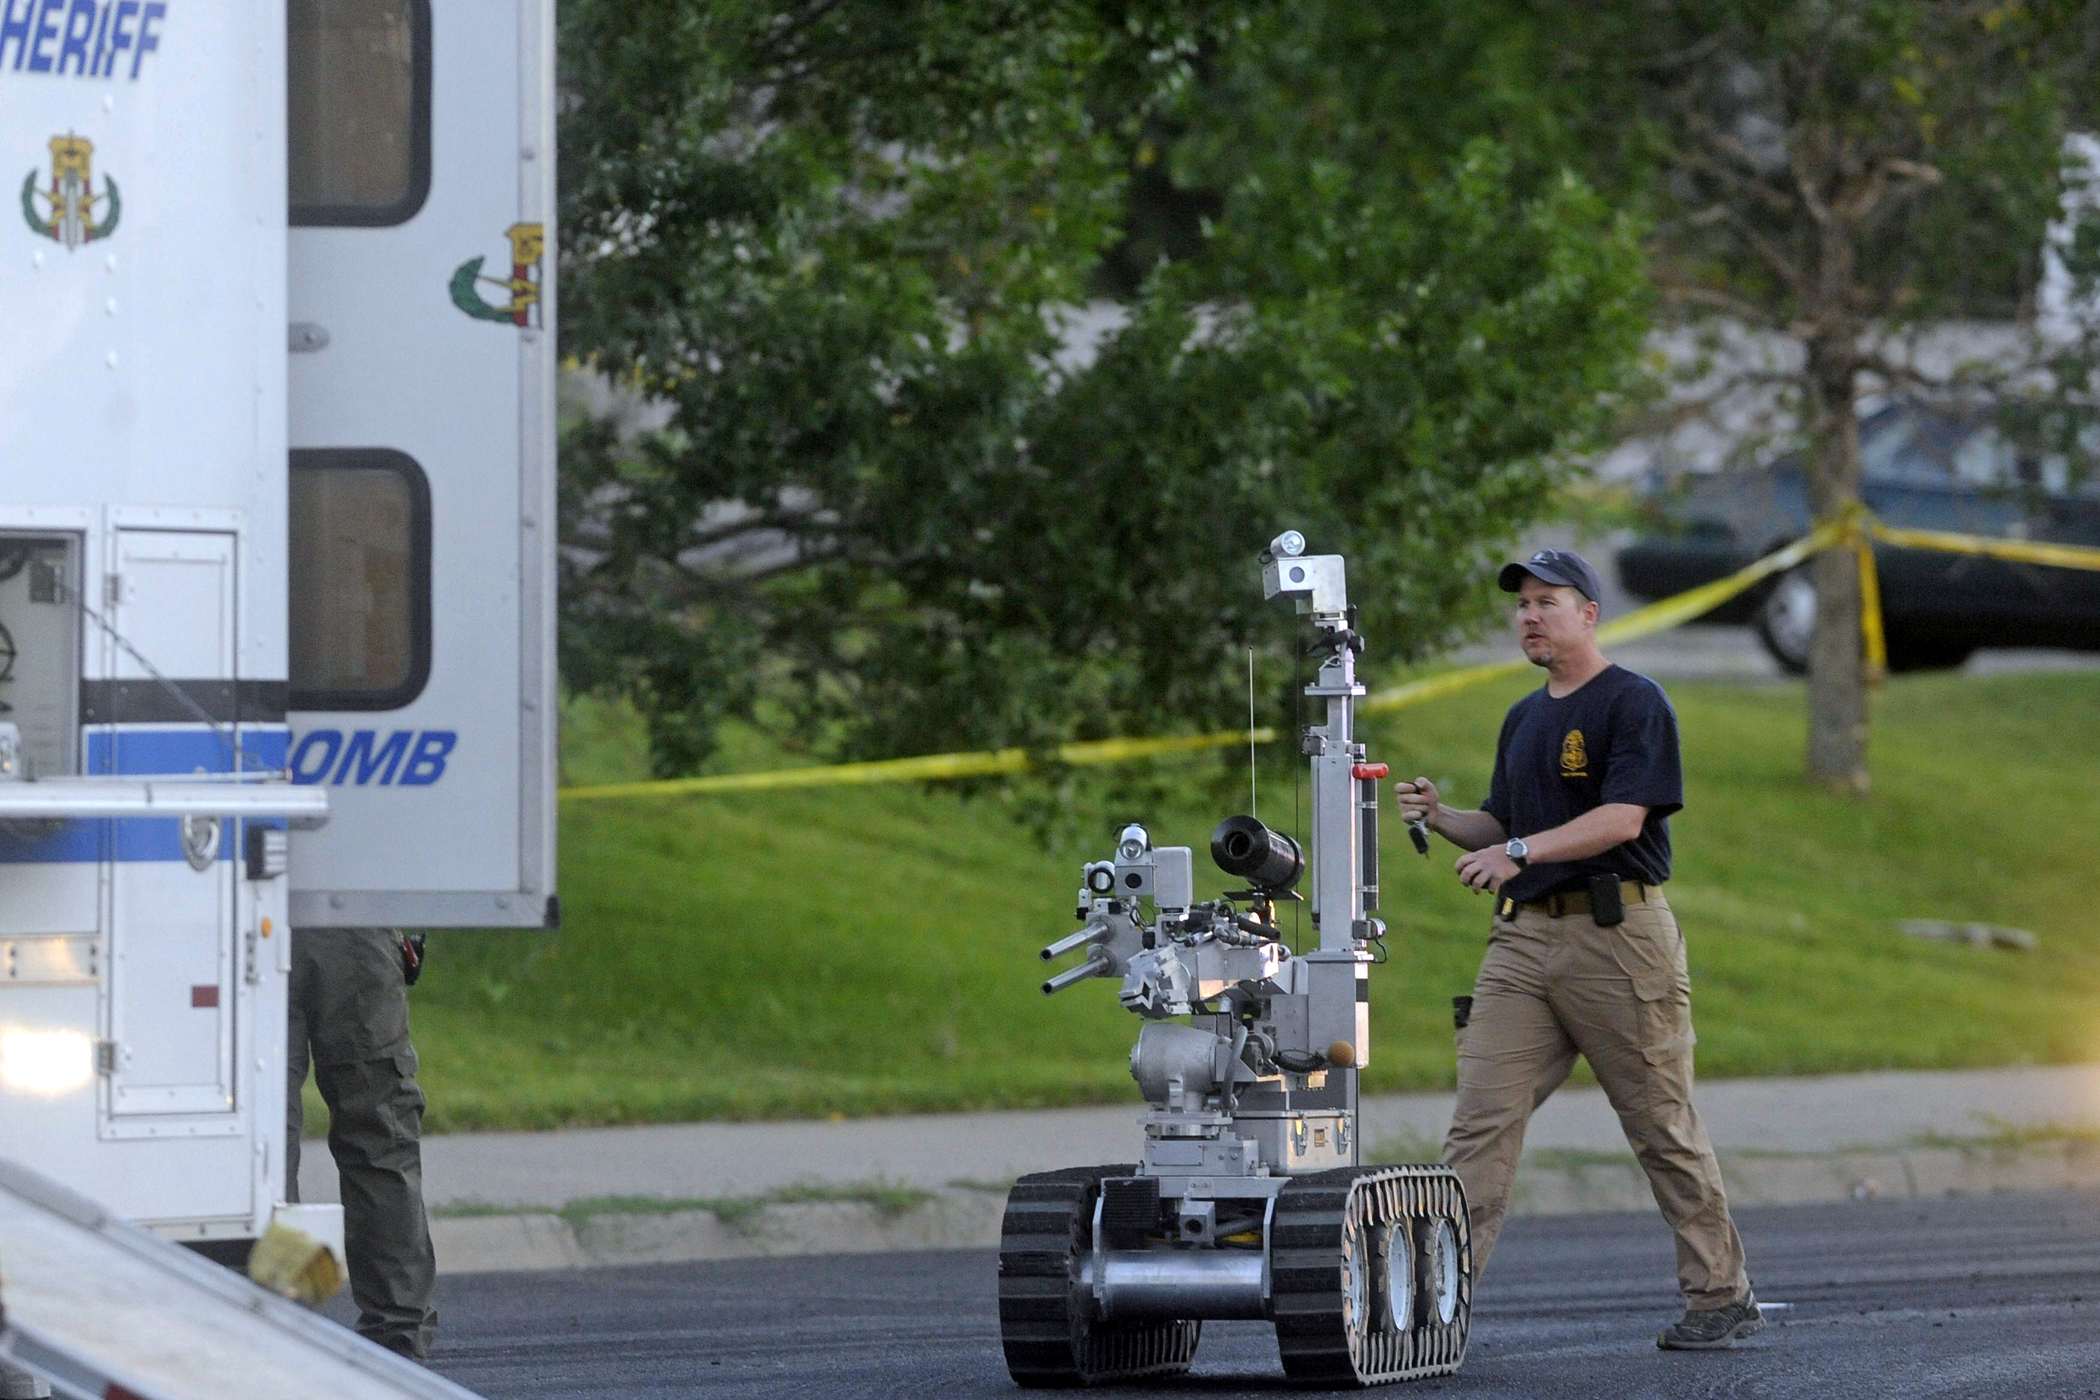 The Aurora bomb squad robot is deployed to search a suspect's car after shooting in Aurora, Colorado